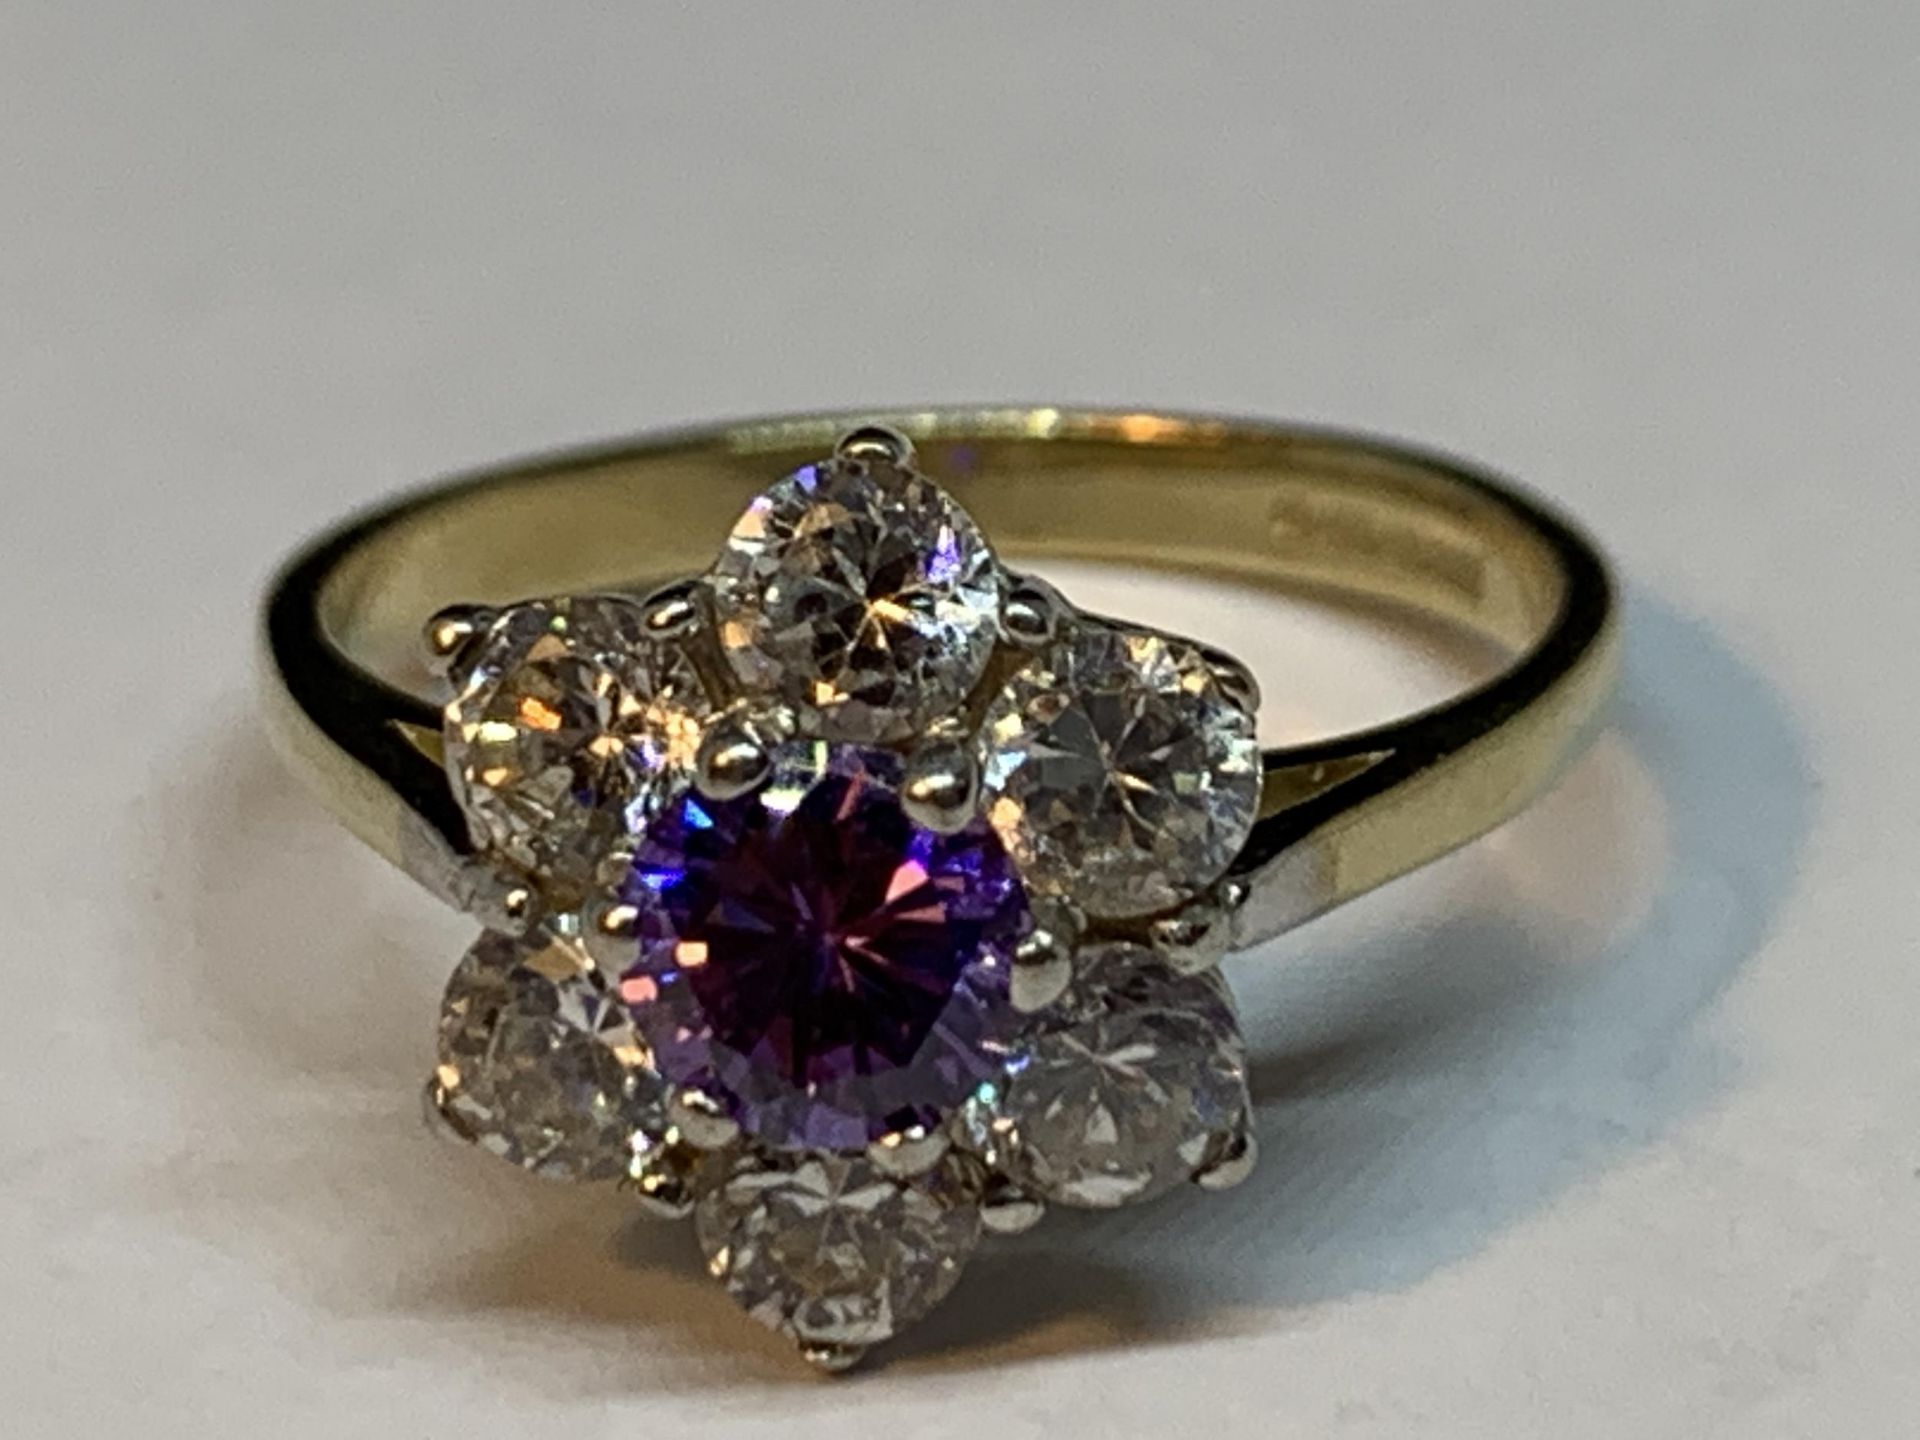 A 9 CARAT GOLD RING WITH CENTRE AMETHYST SURROUNDED BY CUBIC ZIRCONIAS IN A FLOWER DESIGN SIZE P/Q